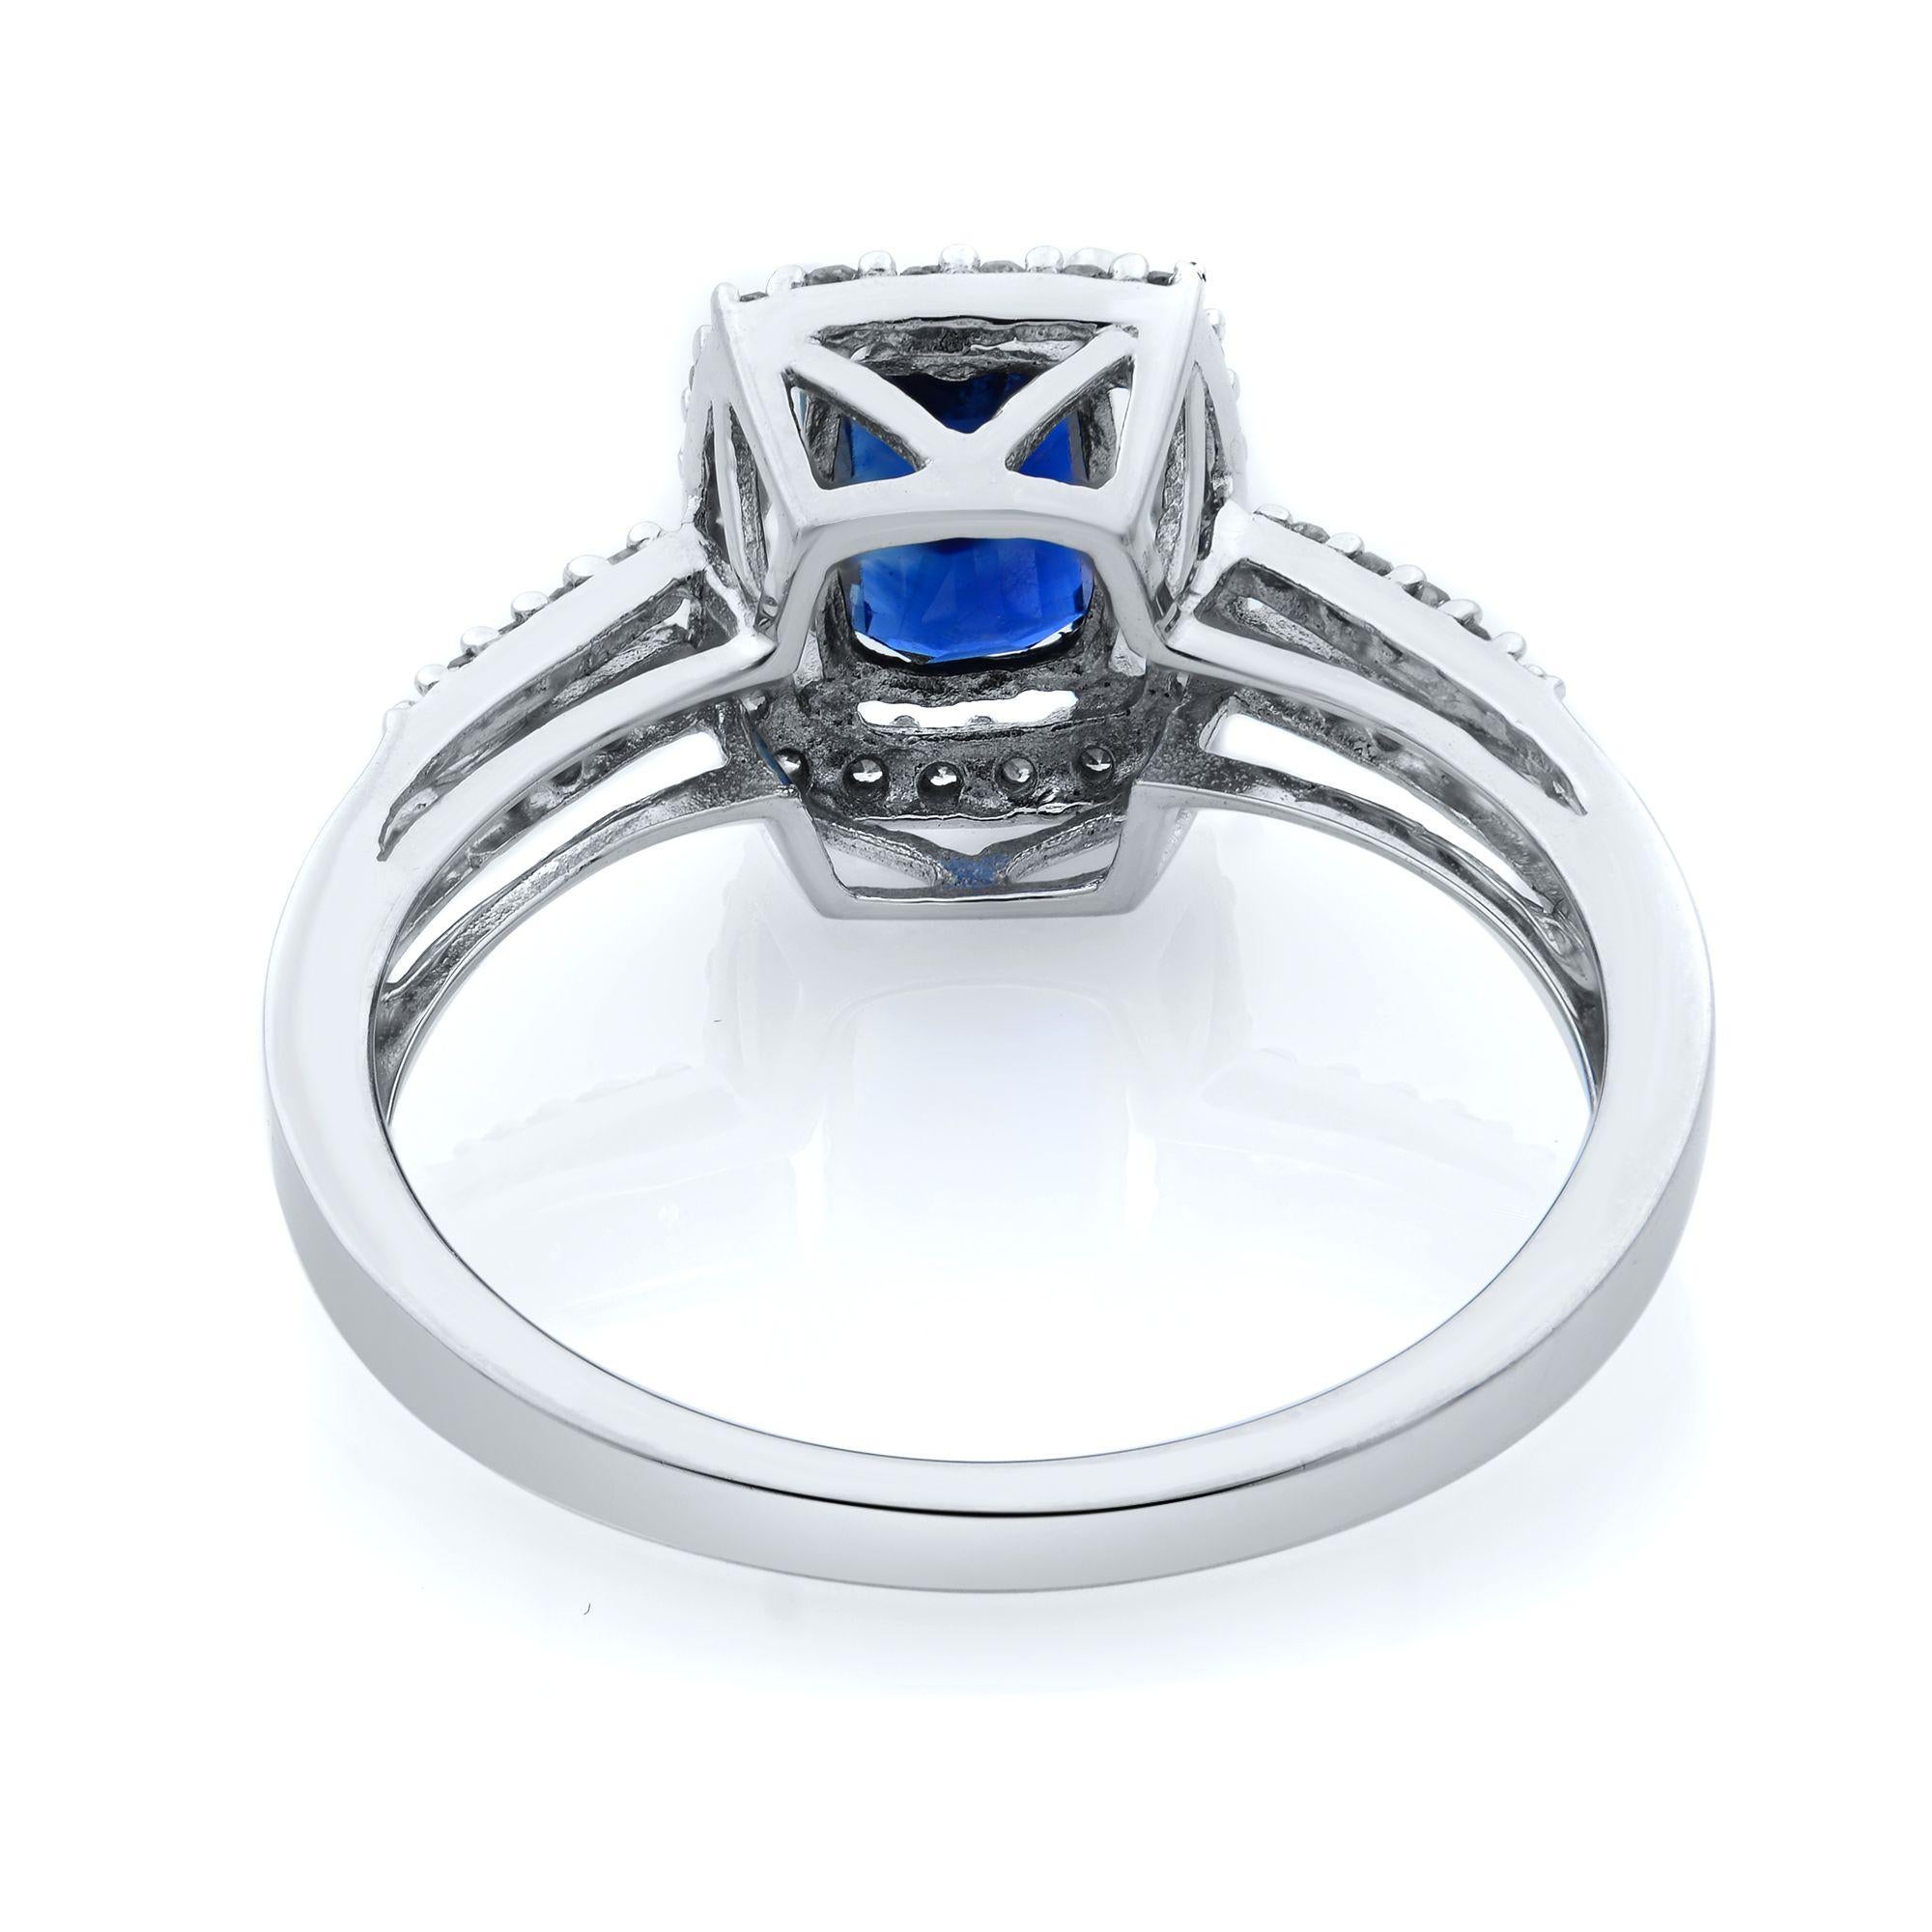 Rachel Koen 14K White Gold Blue Sapphire W/ Diamonds Engagement Ring In Excellent Condition For Sale In New York, NY